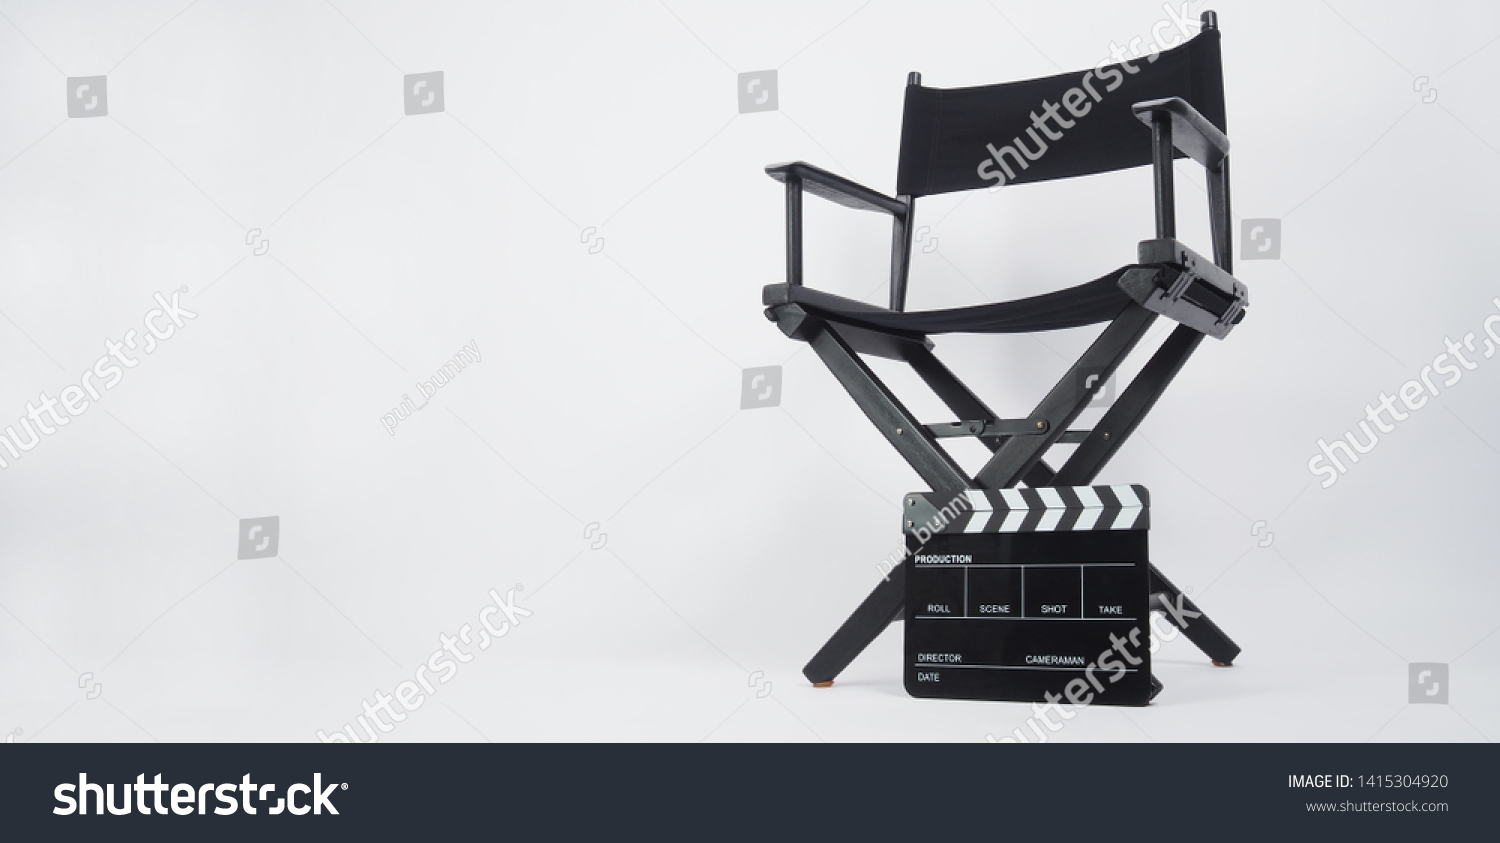 Black Clapper board or movie slate with director chair use in video production or movie and cinema industry. It's put on white background.
. #1415304920